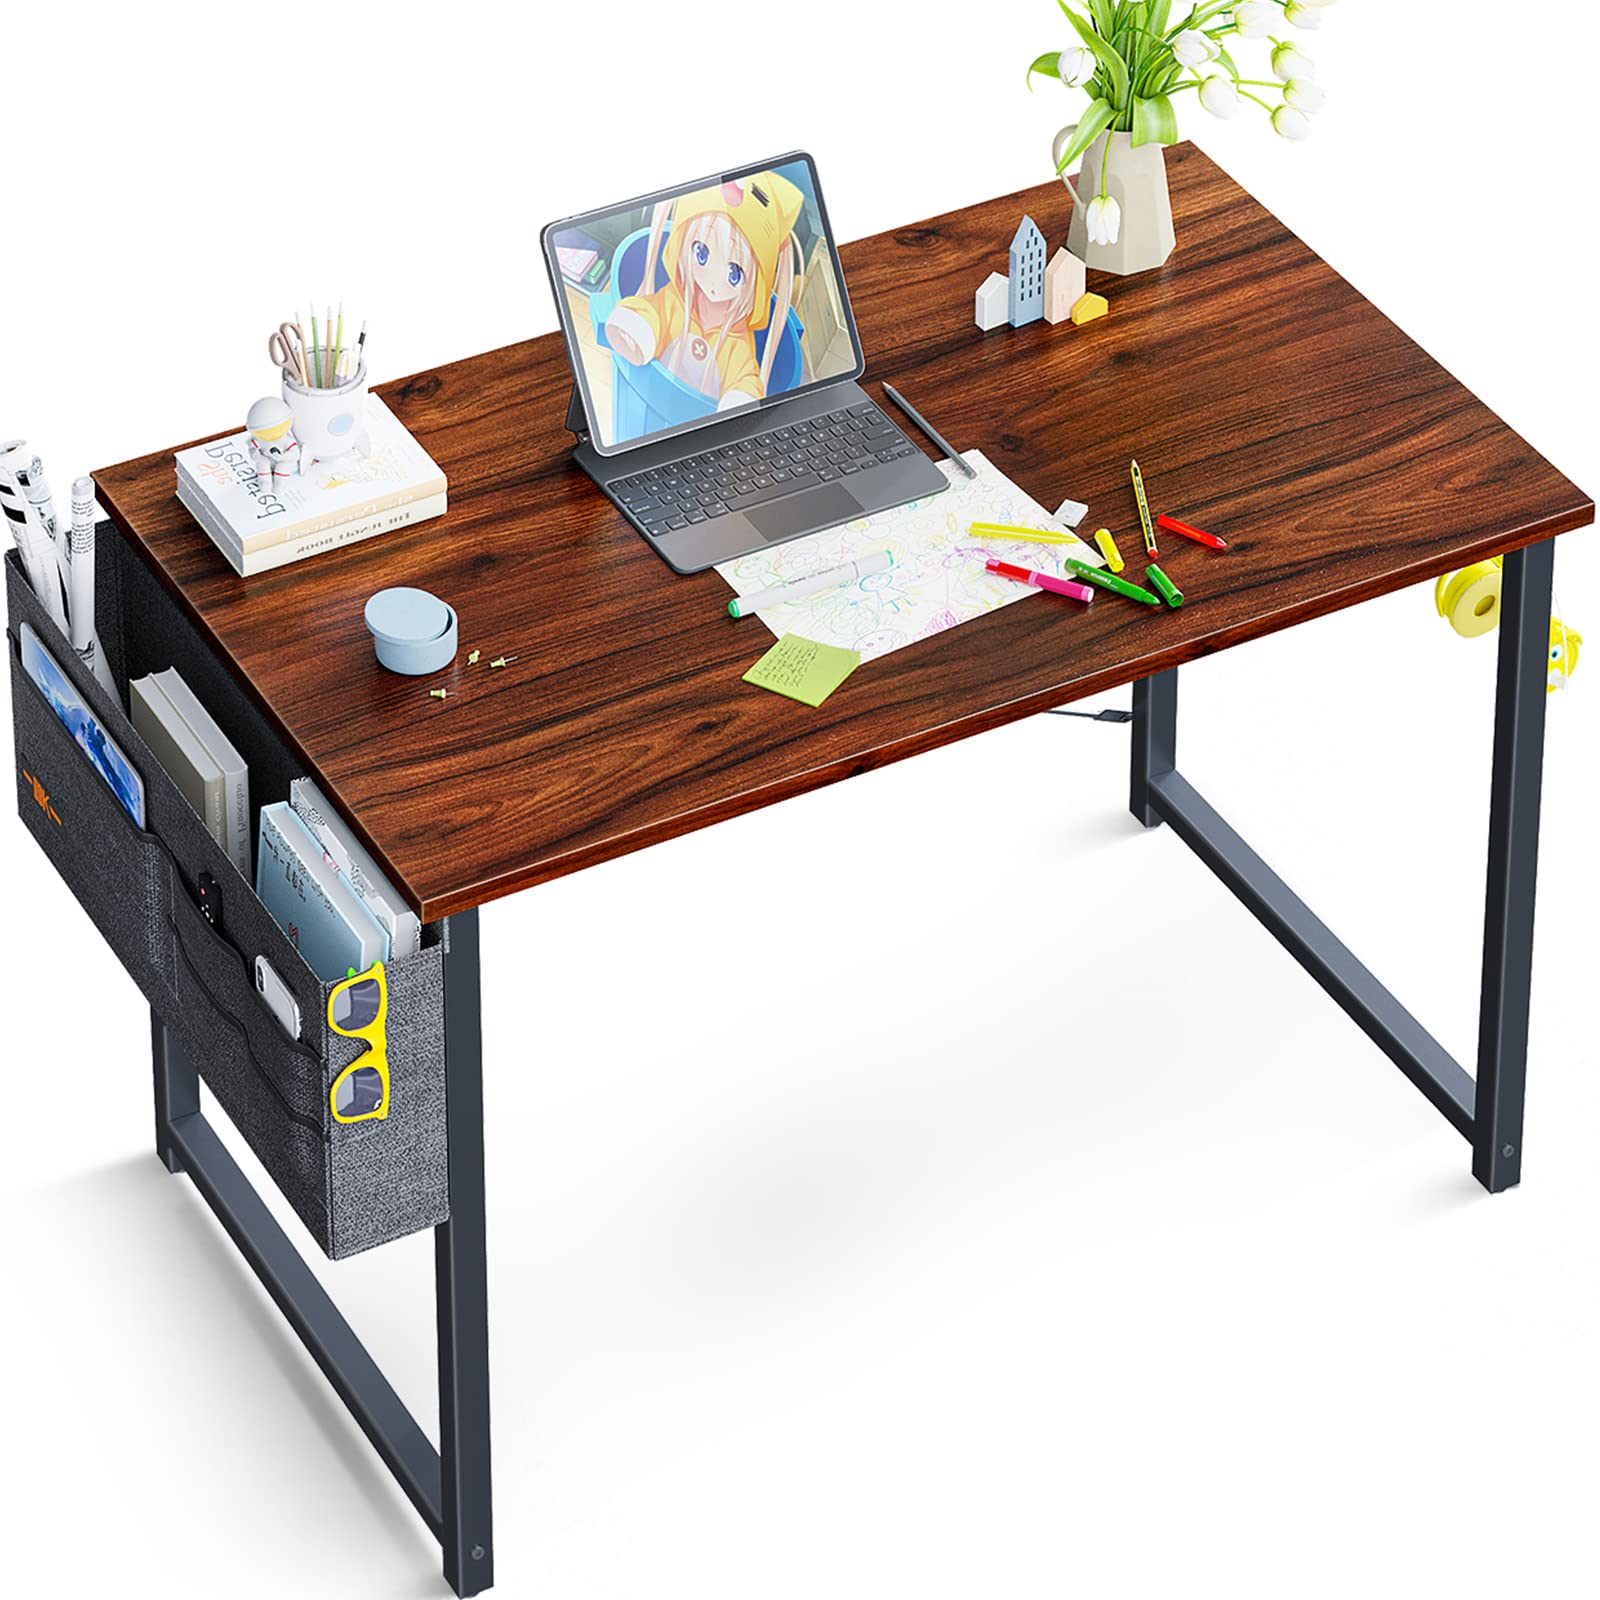 ODK 32 inch Small Computer Desk Study Table for Small Spaces Home Office Student Laptop PC Writing Desks with Storage Bag Headphone Hook, Deep Brown Kids Desk $36.52